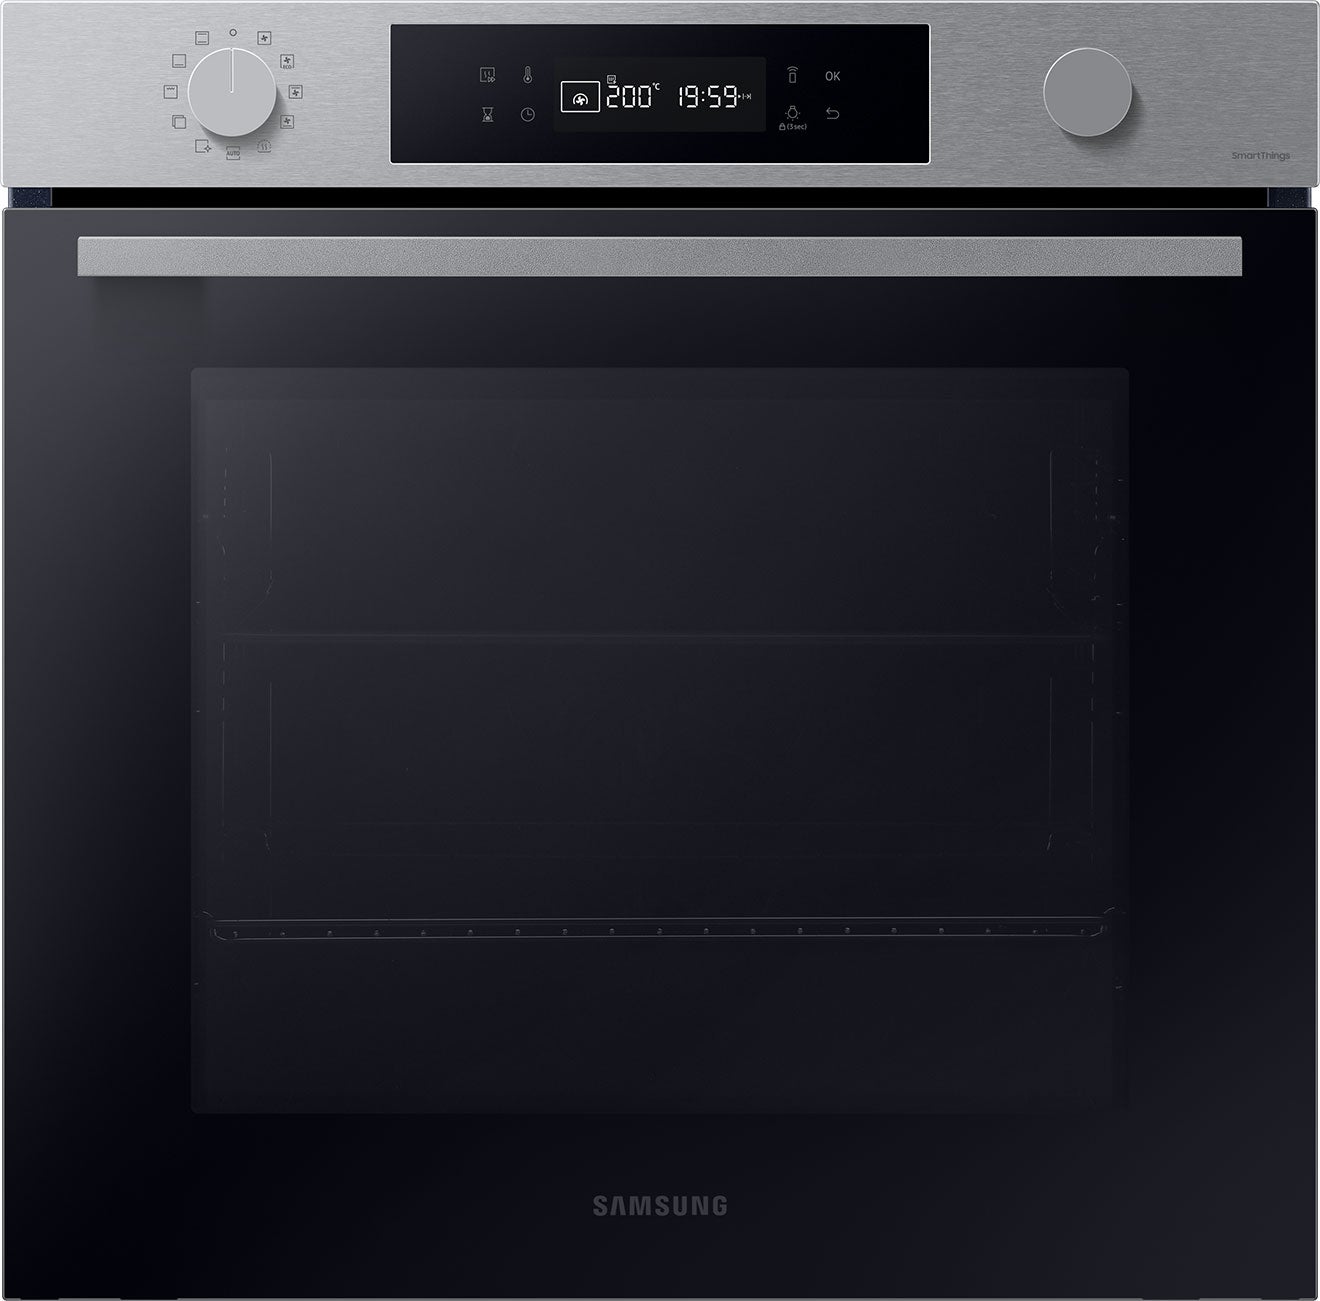 Samsung 76L Series 4 Catalytic Built-in Oven with SmartThings - NV7B41201AS